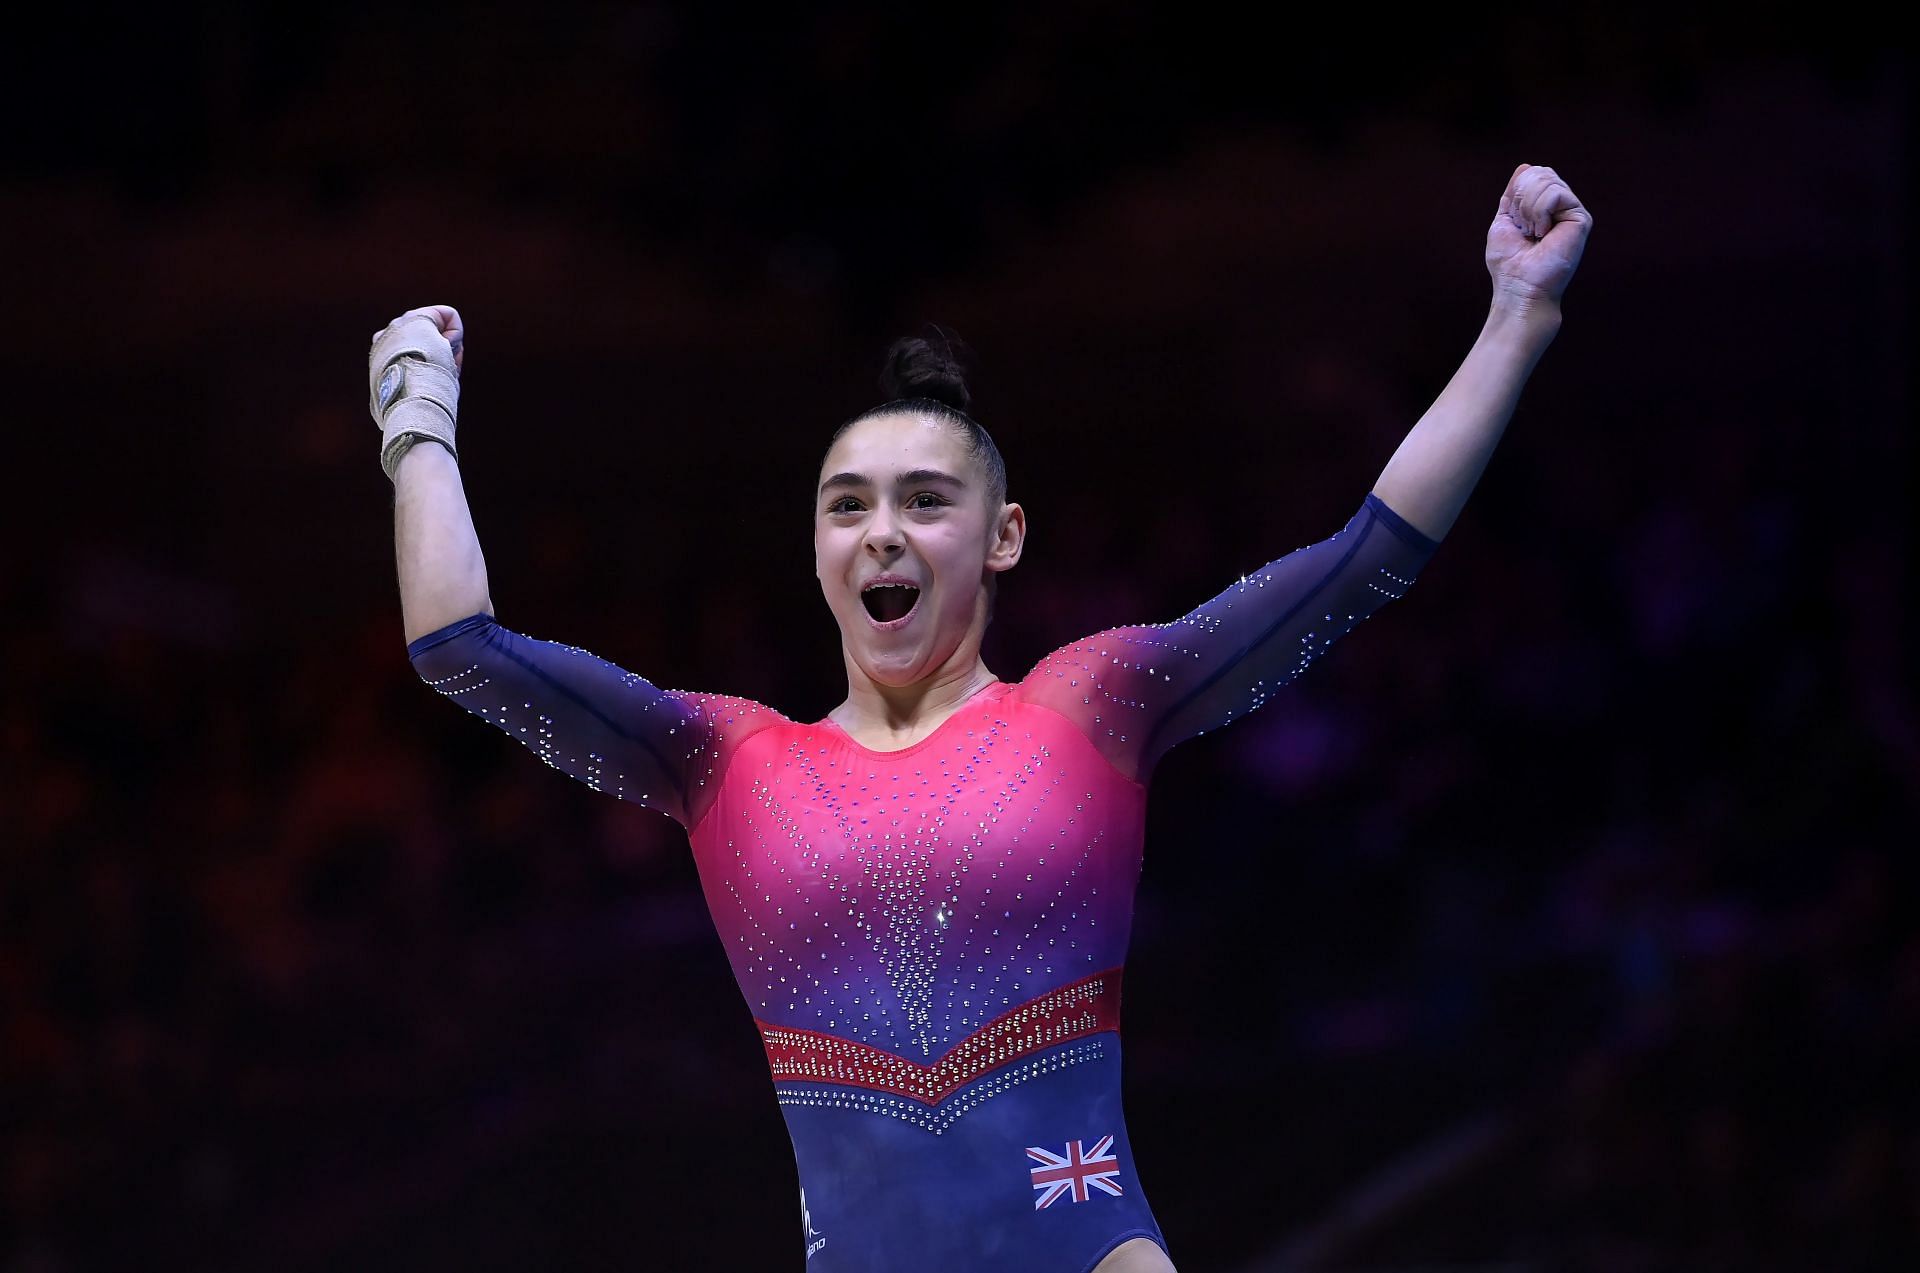 World Artistic Gymnastics Championships 2022 Final results and all